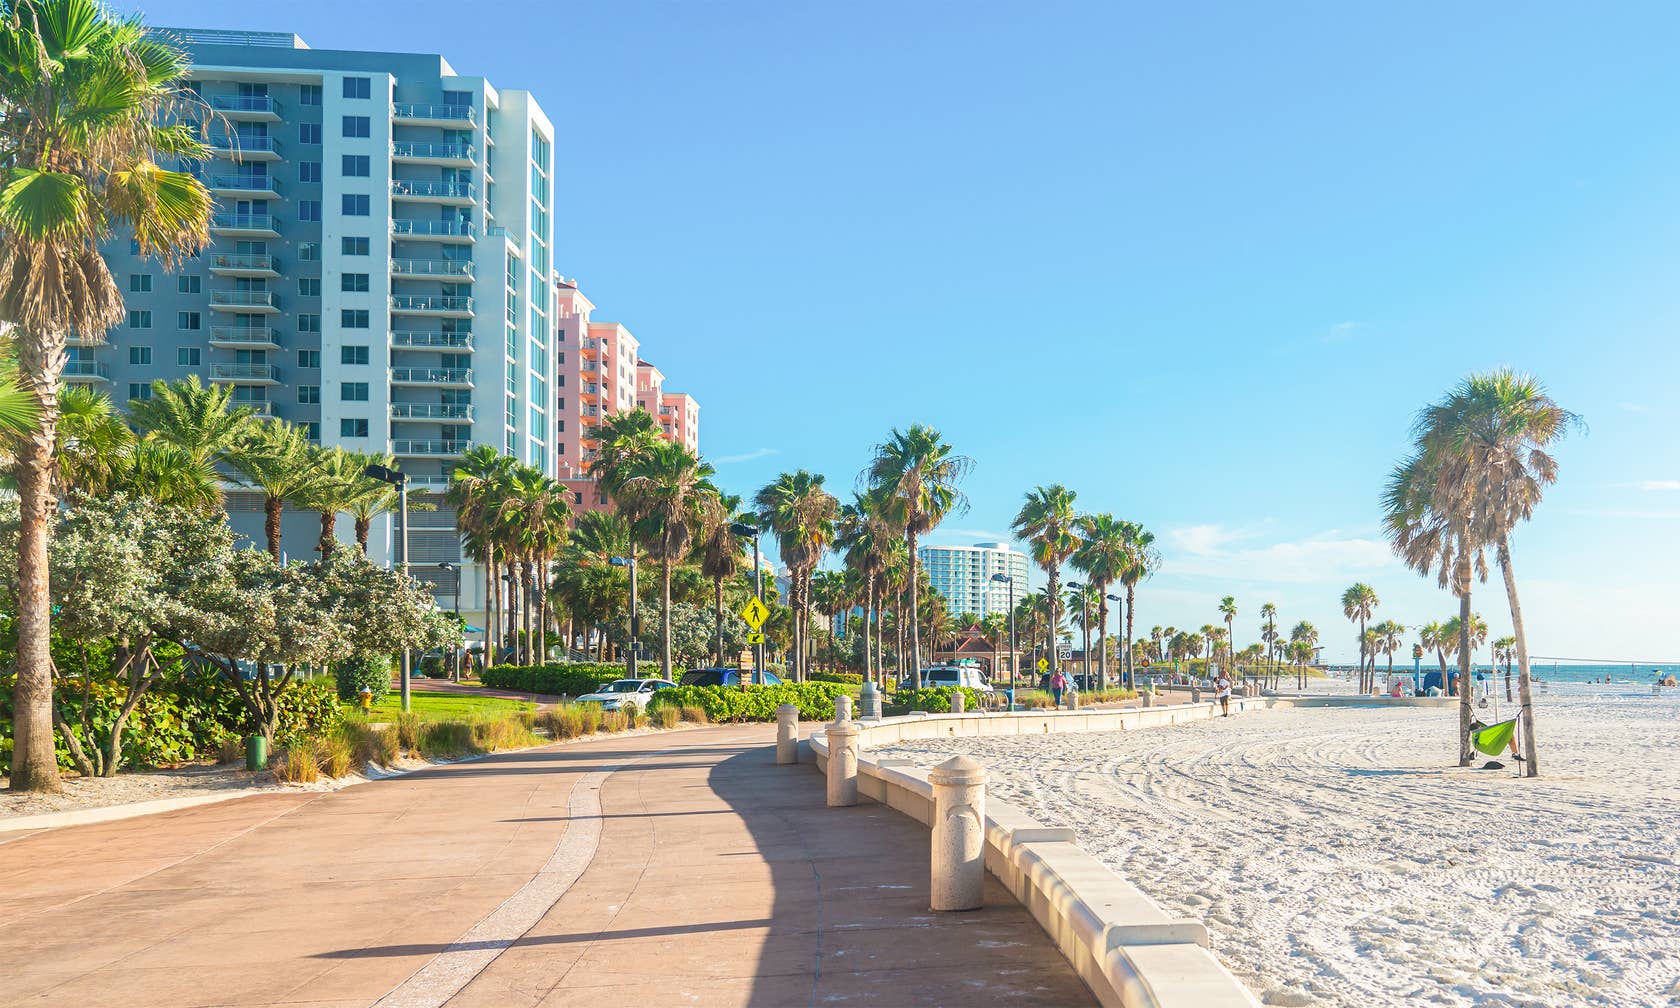 House rentals in Clearwater